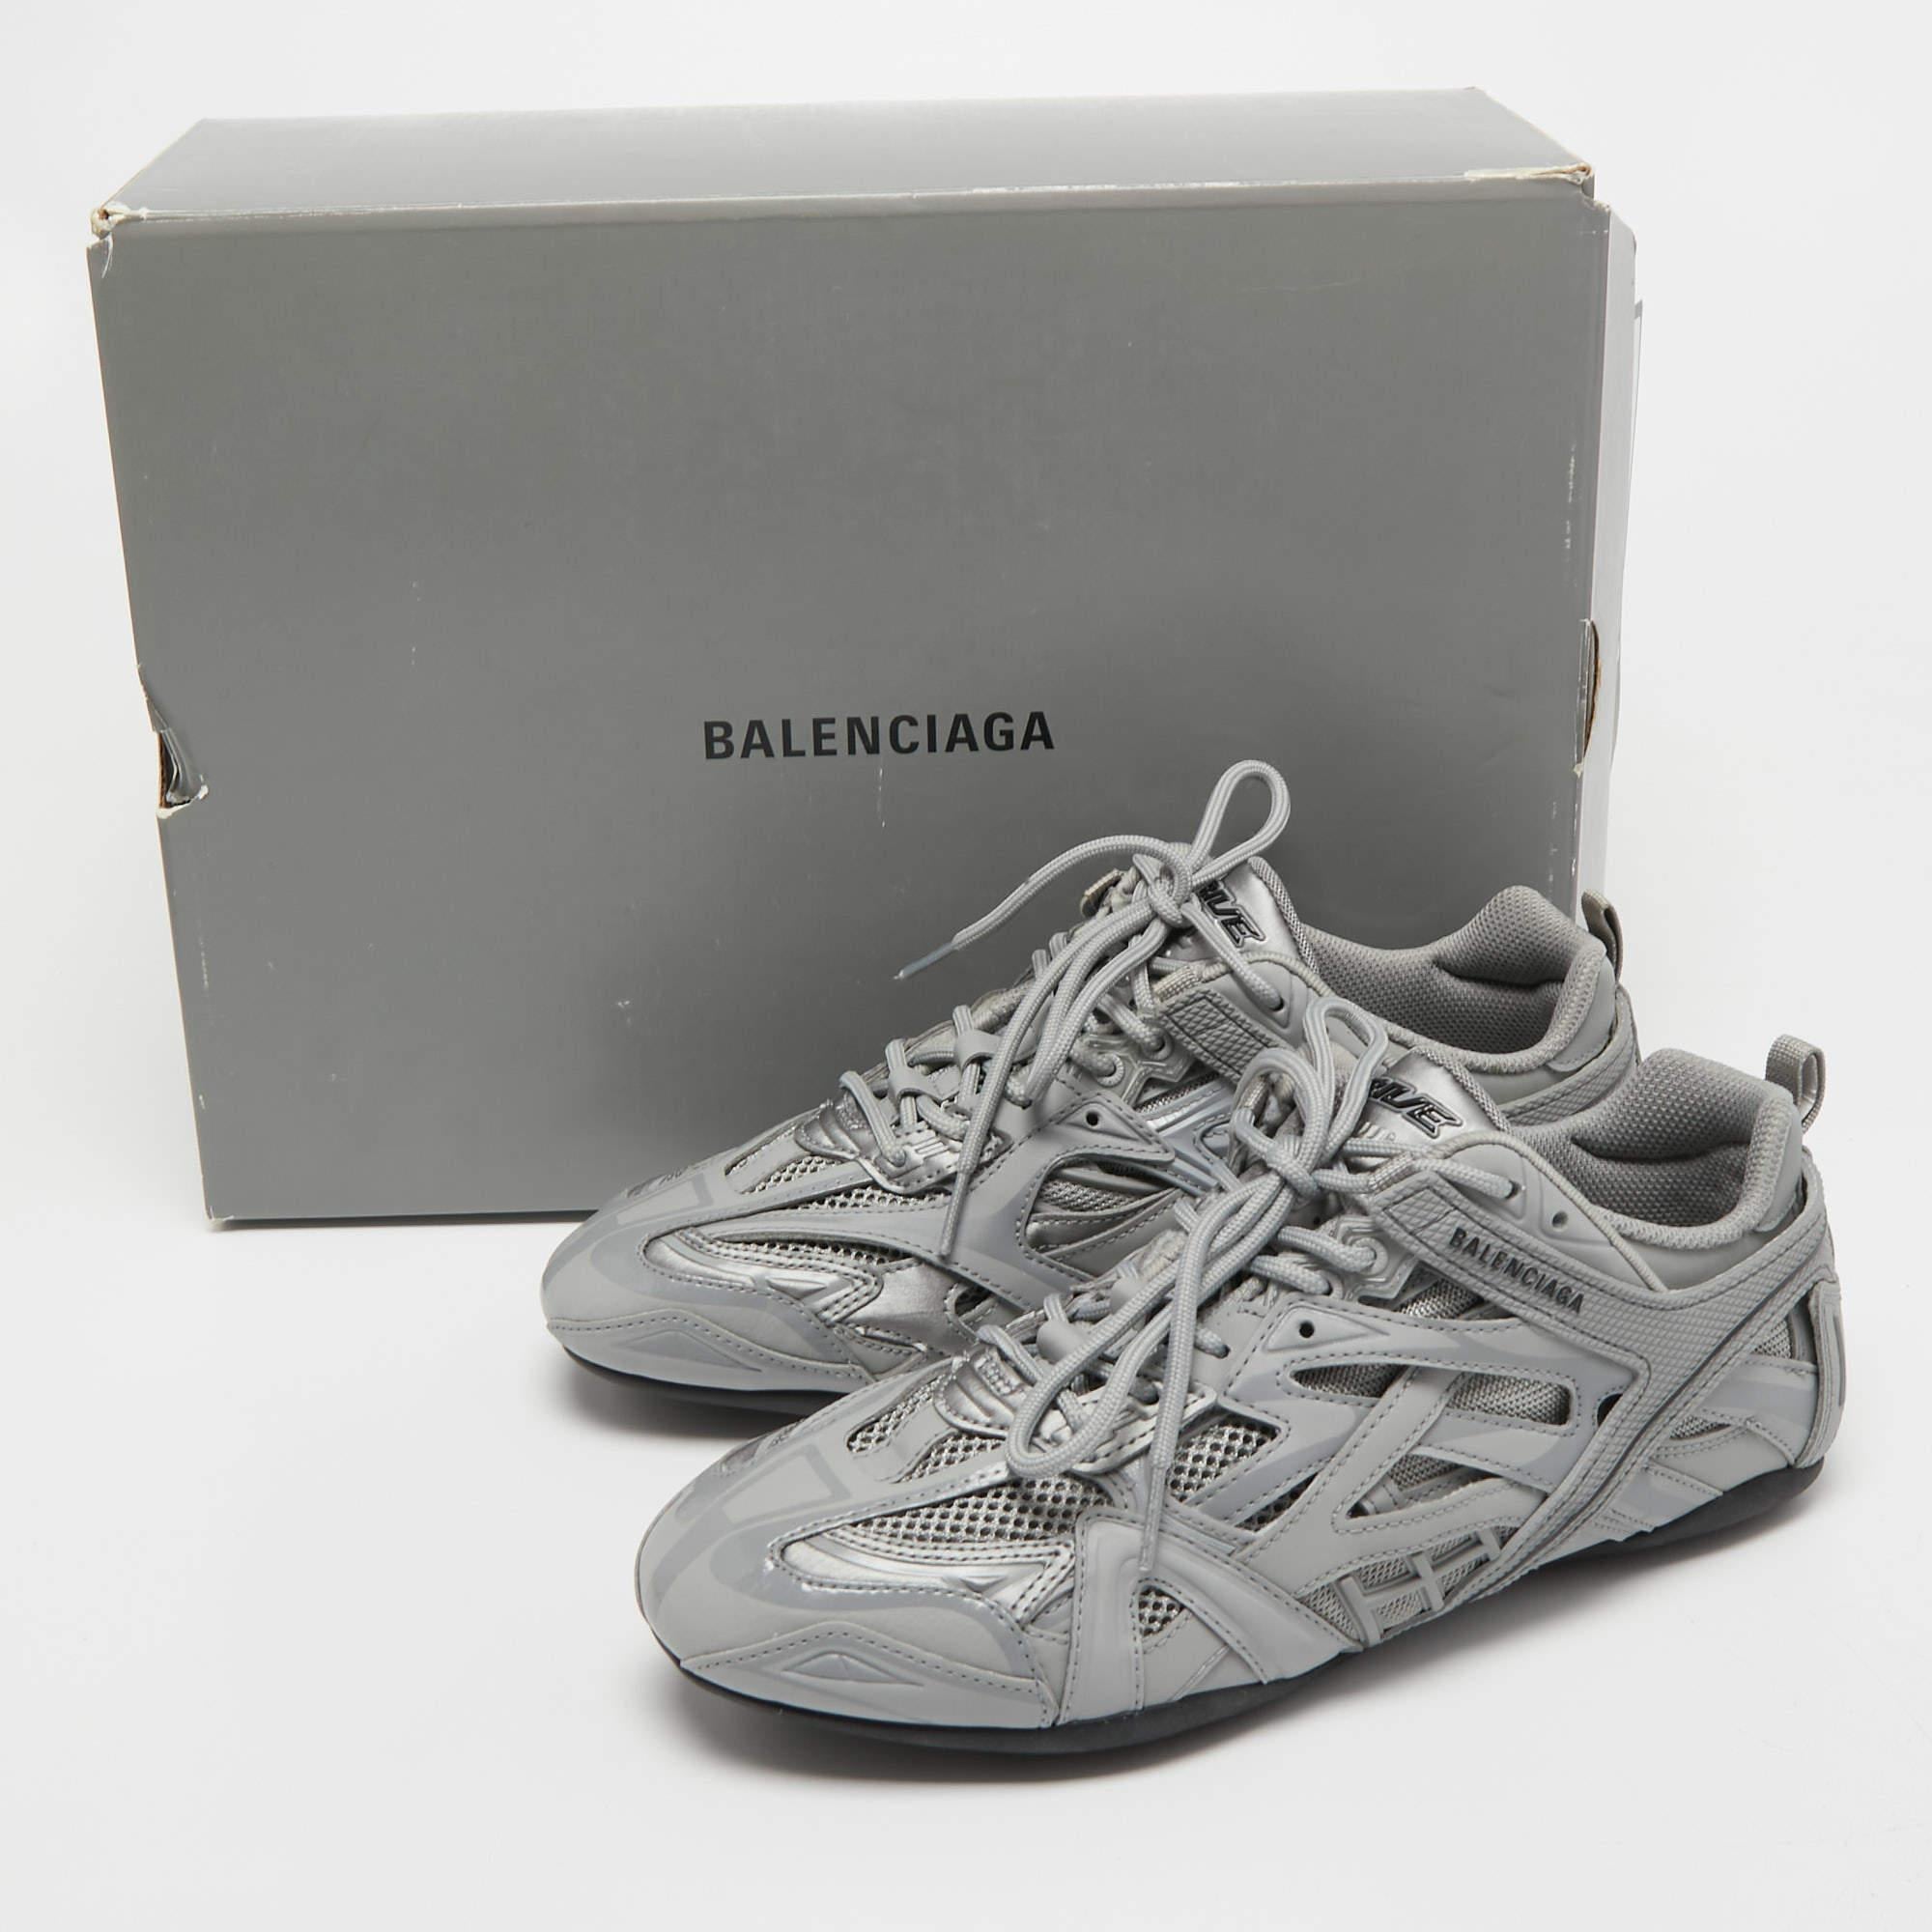 Balenciaga Grey Leather and Mesh Drive Sneakers Size 41 1